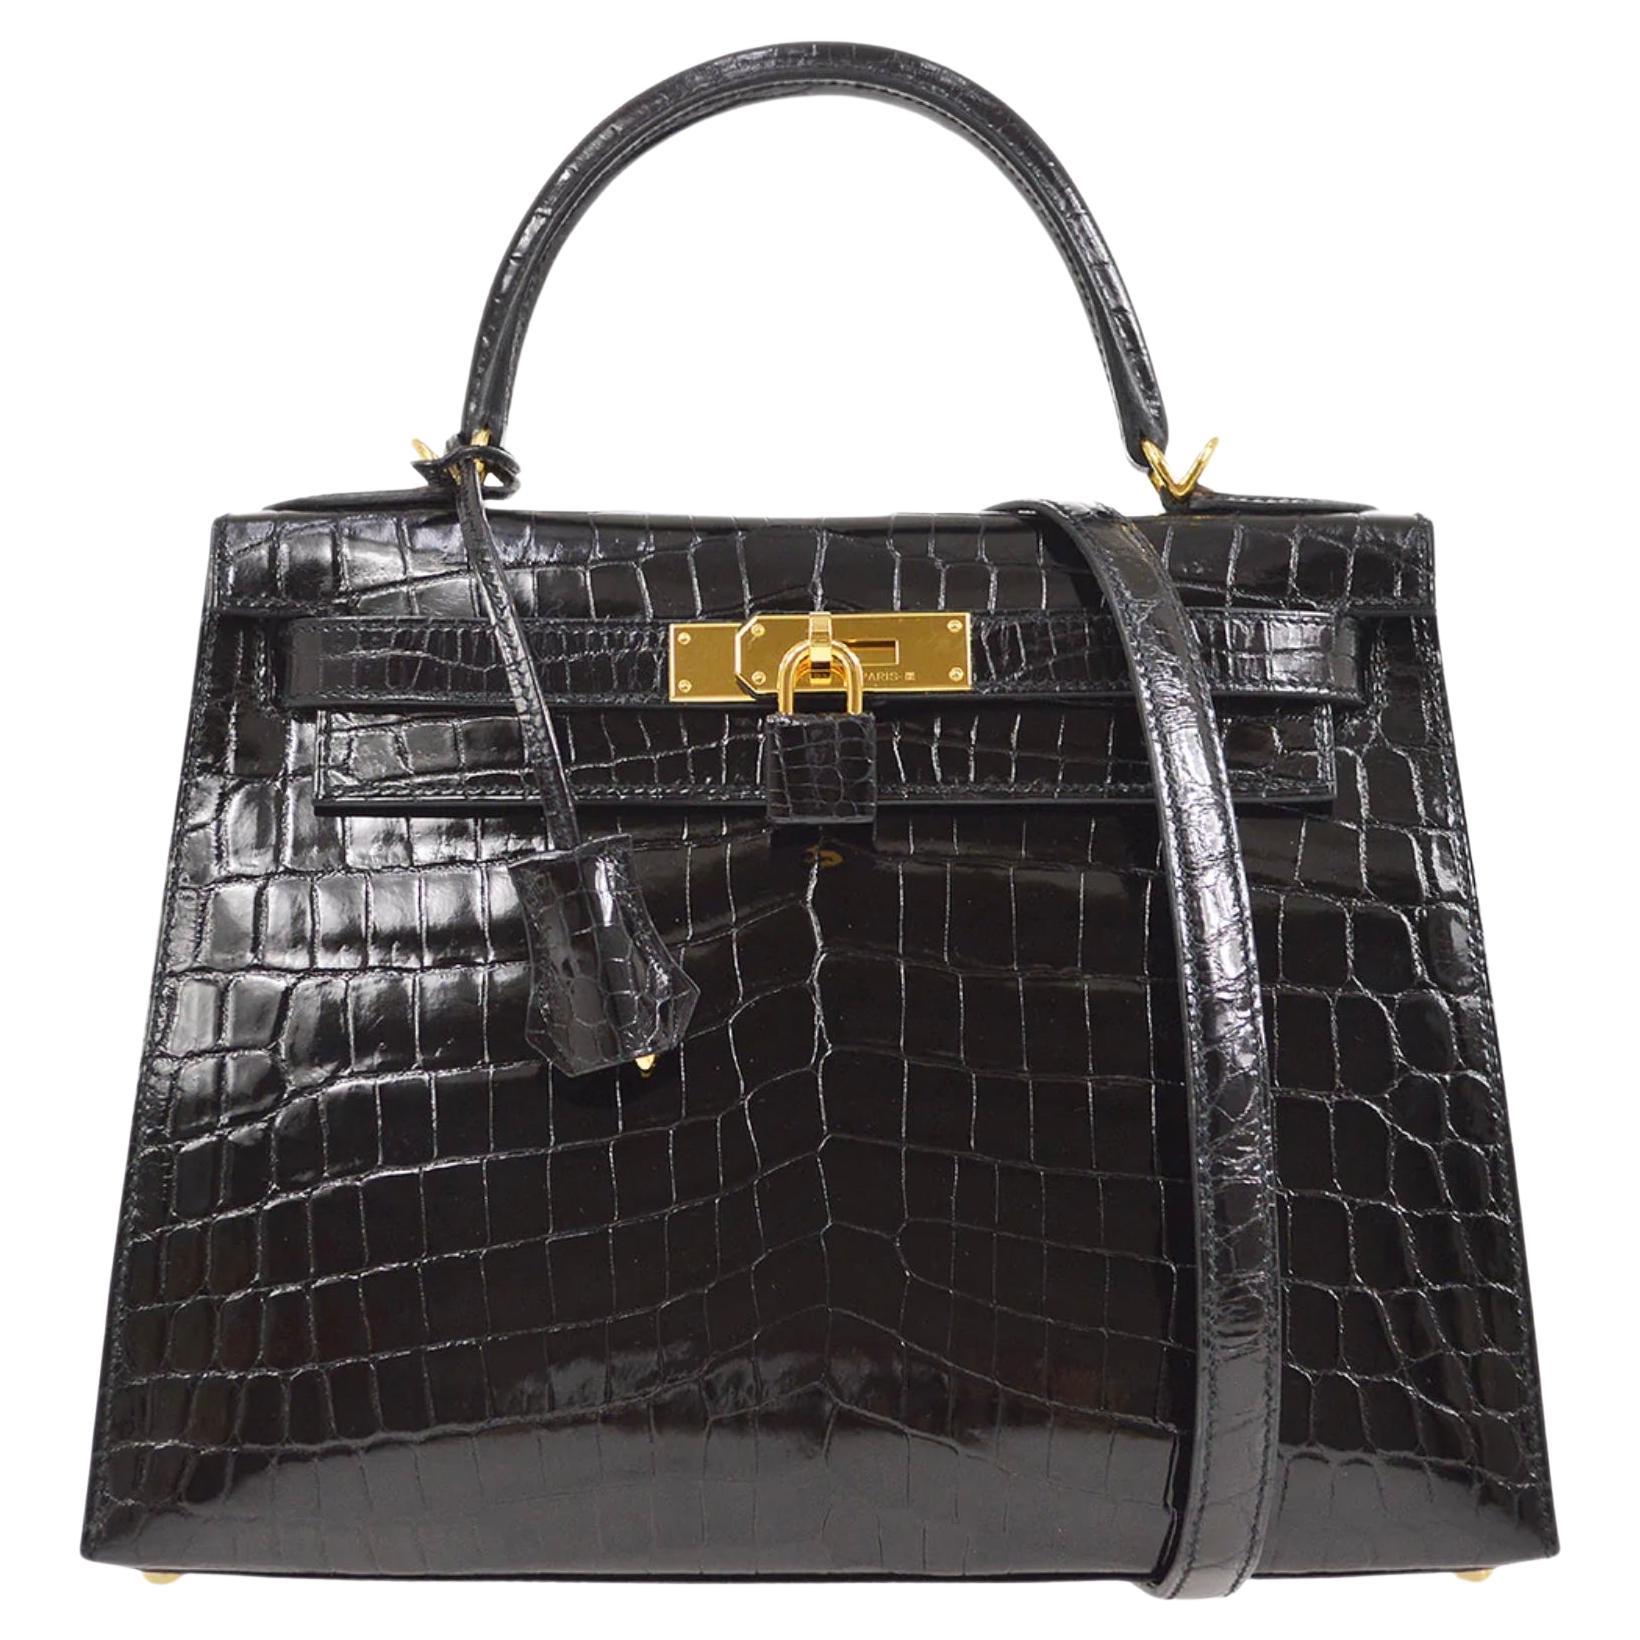 HERMES Kelly 28 Sellier Black Niloticus Crocodile Exotic Leather Gold Tote Bag